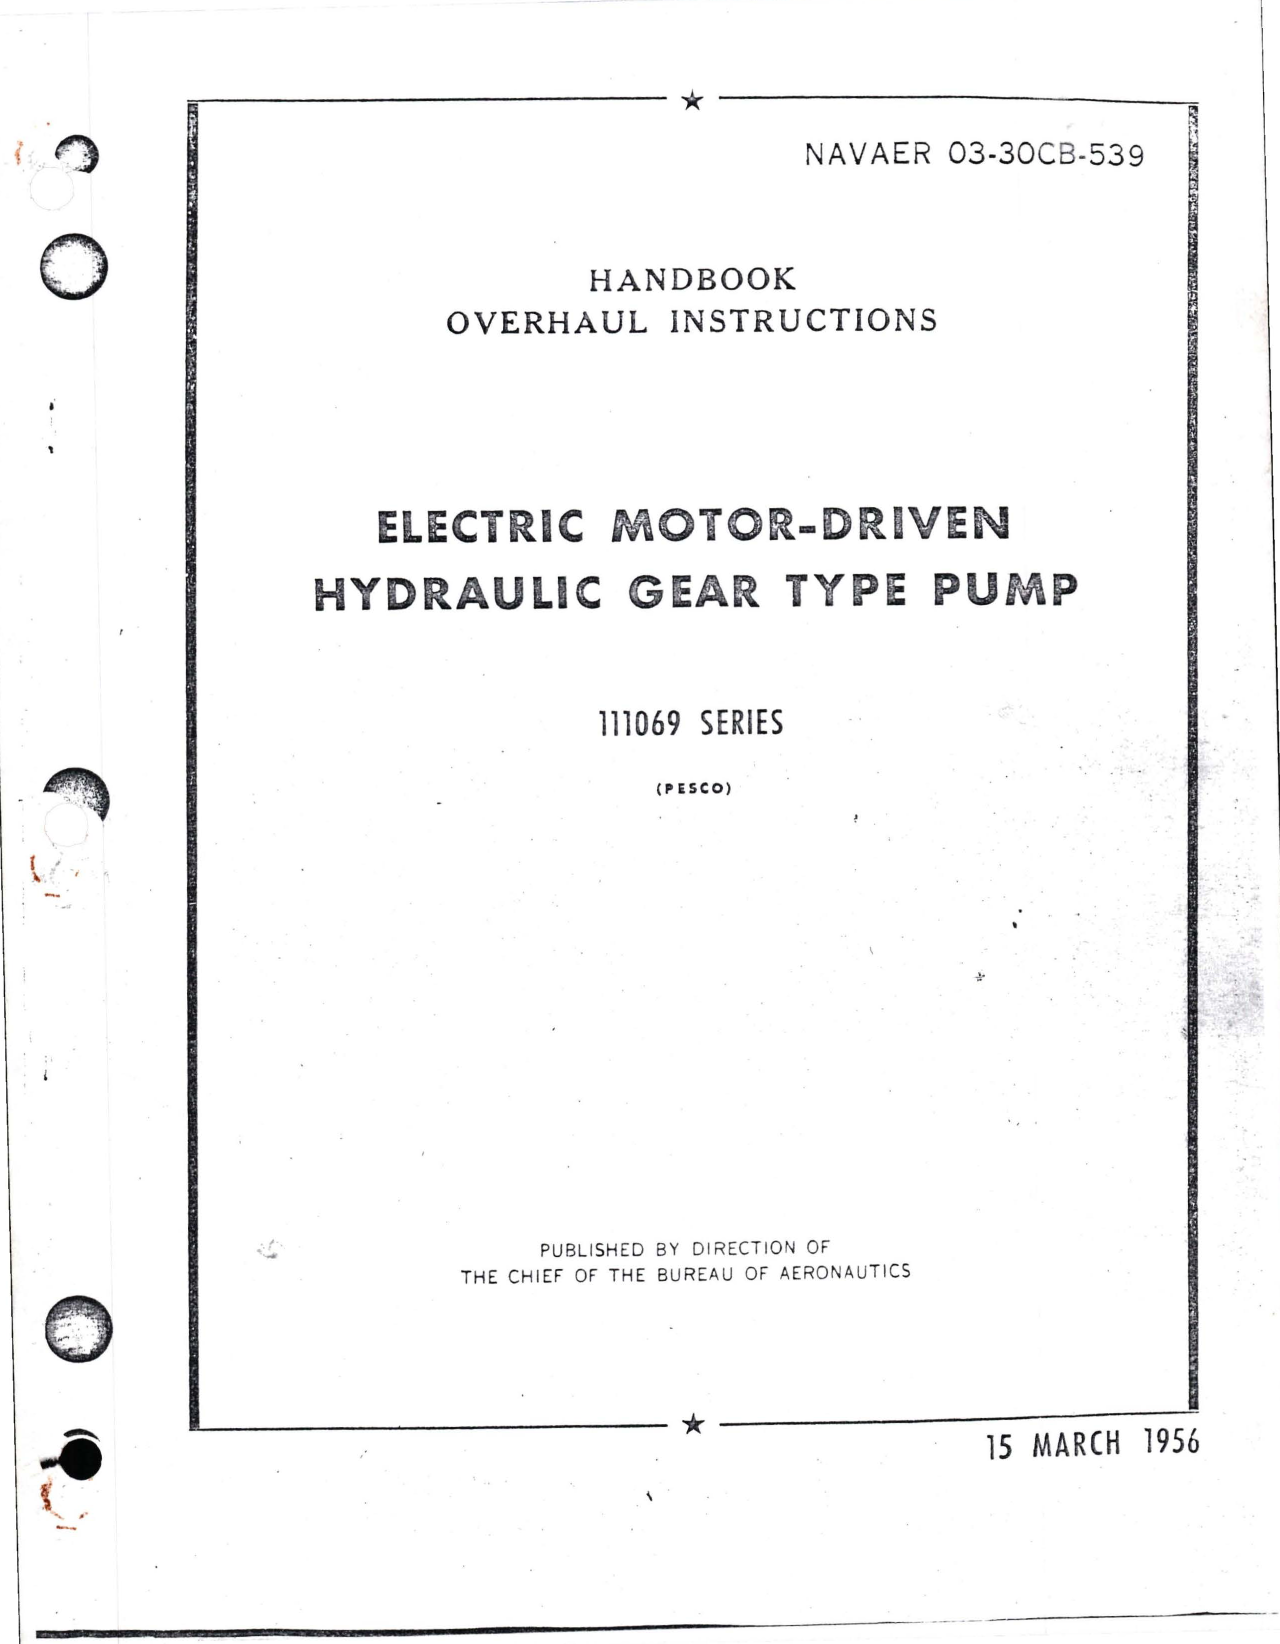 Sample page 1 from AirCorps Library document: Overhaul Instructions for Elect Motor Driven Hydraulic Gear Type Pump - 111069 Series